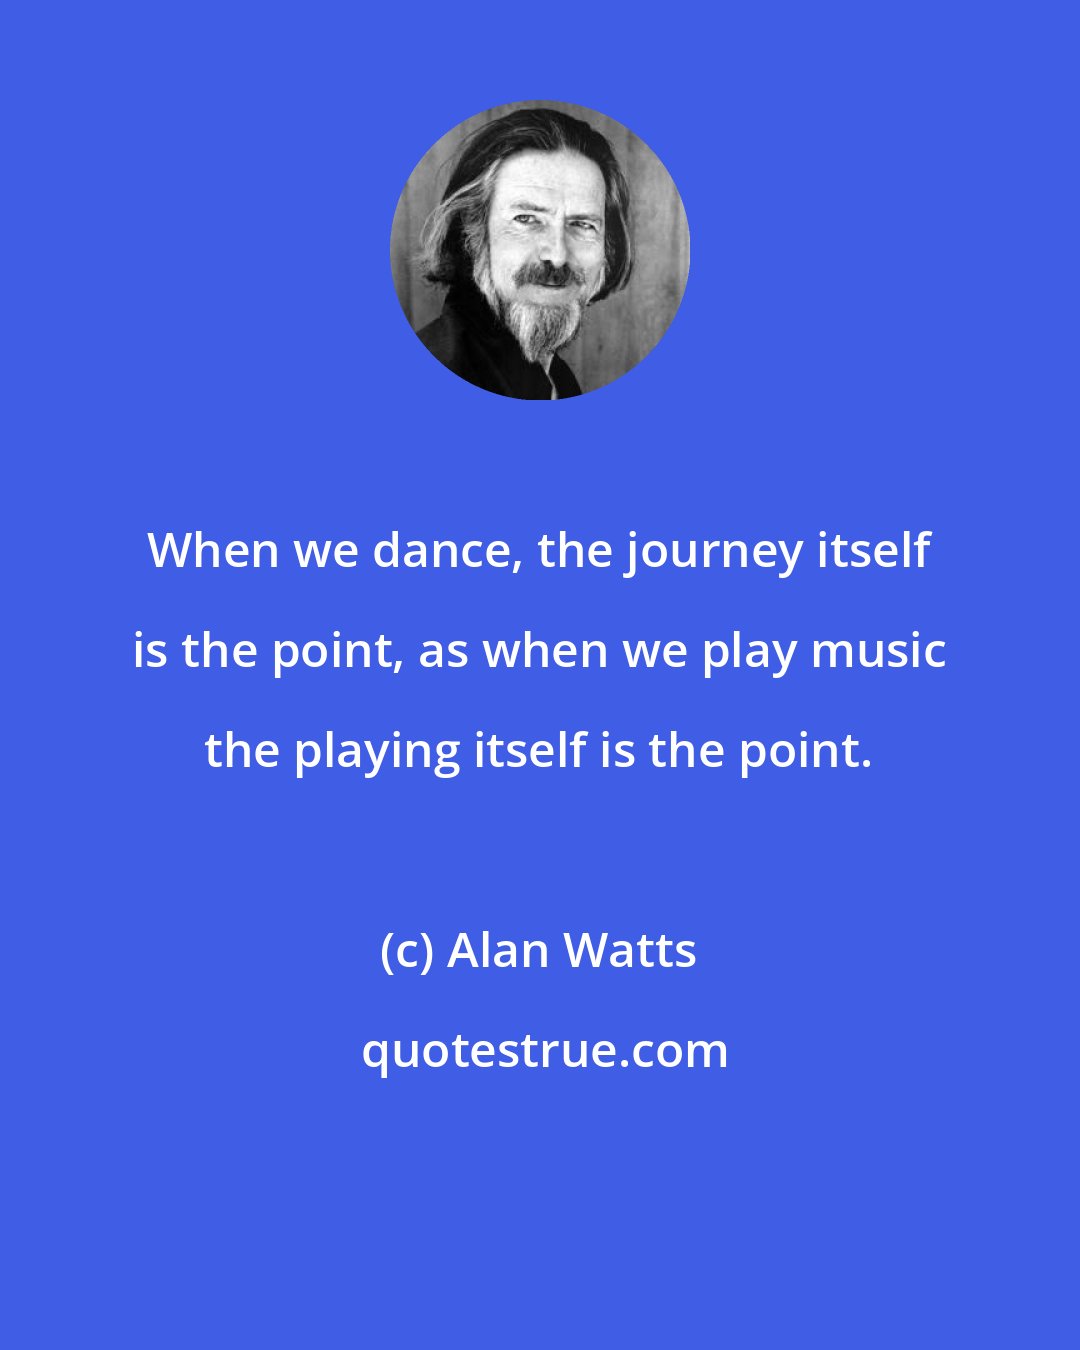 Alan Watts: When we dance, the journey itself is the point, as when we play music the playing itself is the point.